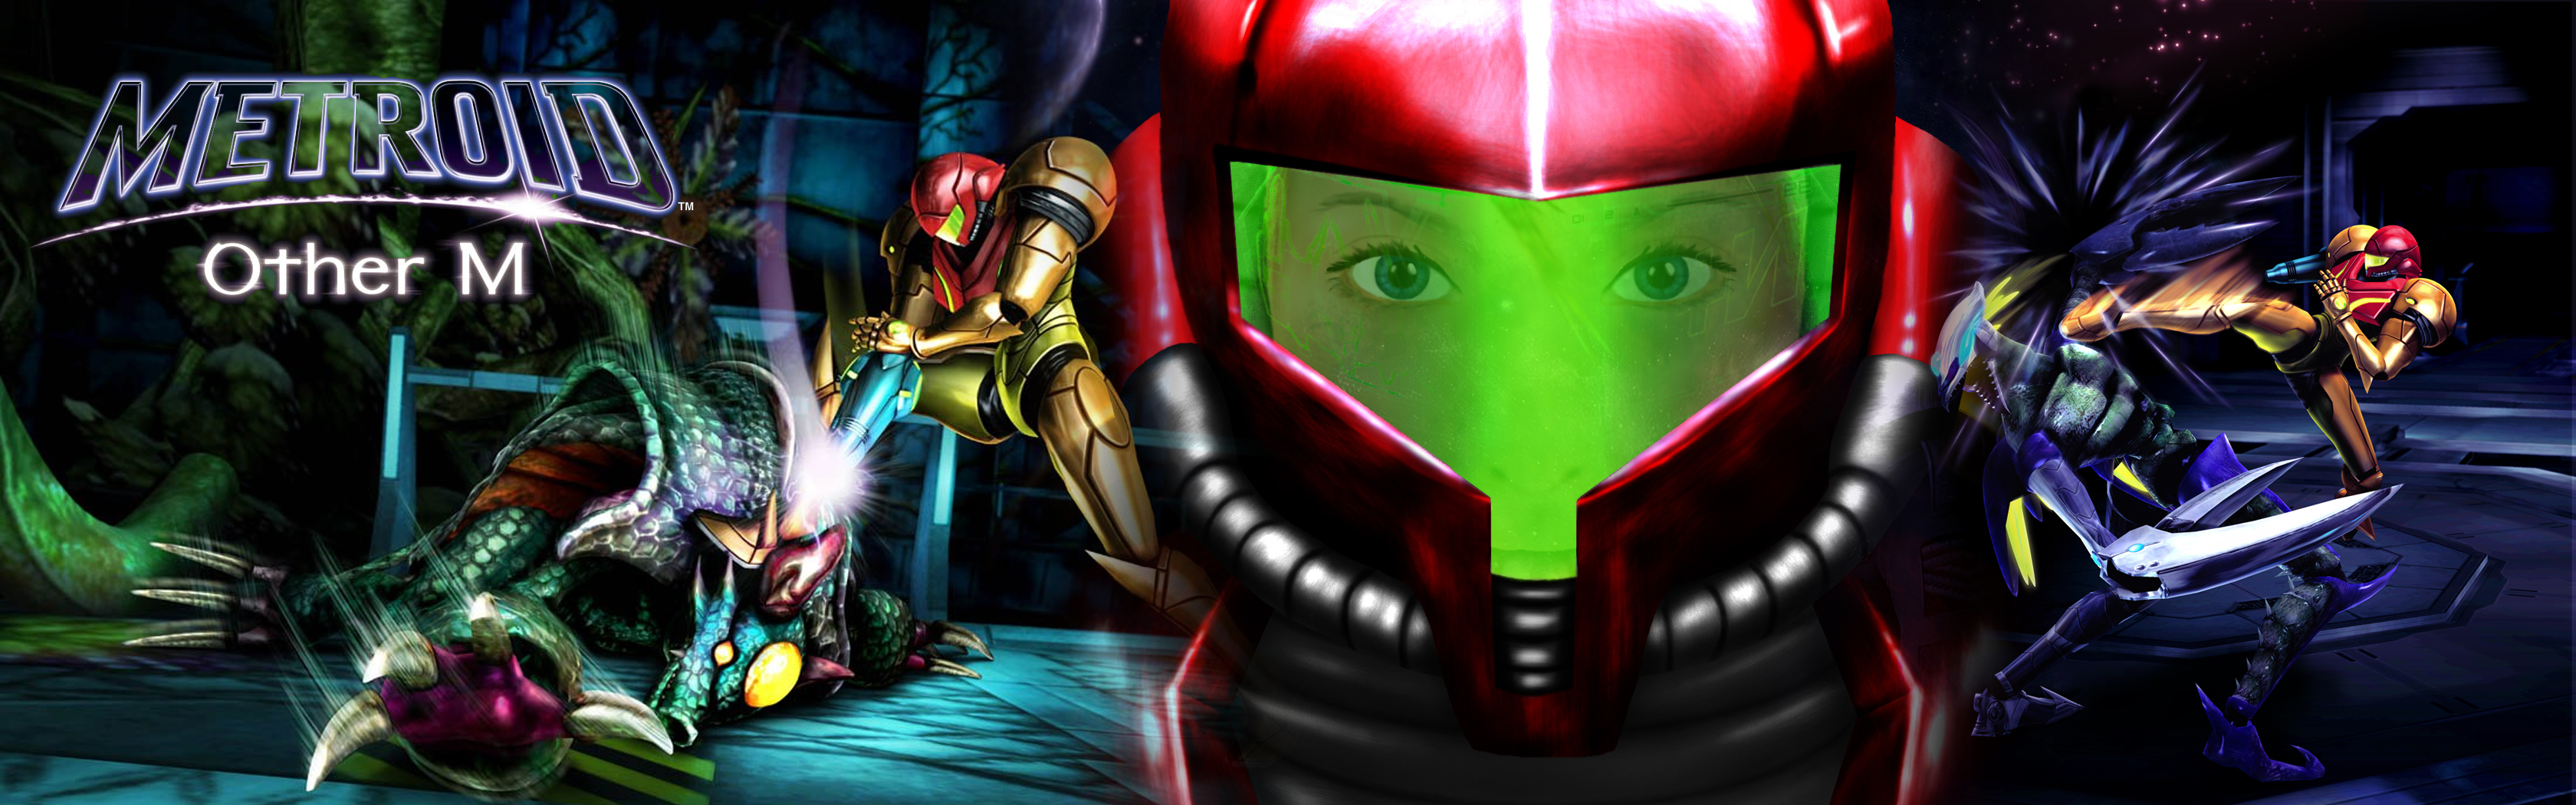 Video Game Metroid: Other M HD Wallpaper | Background Image